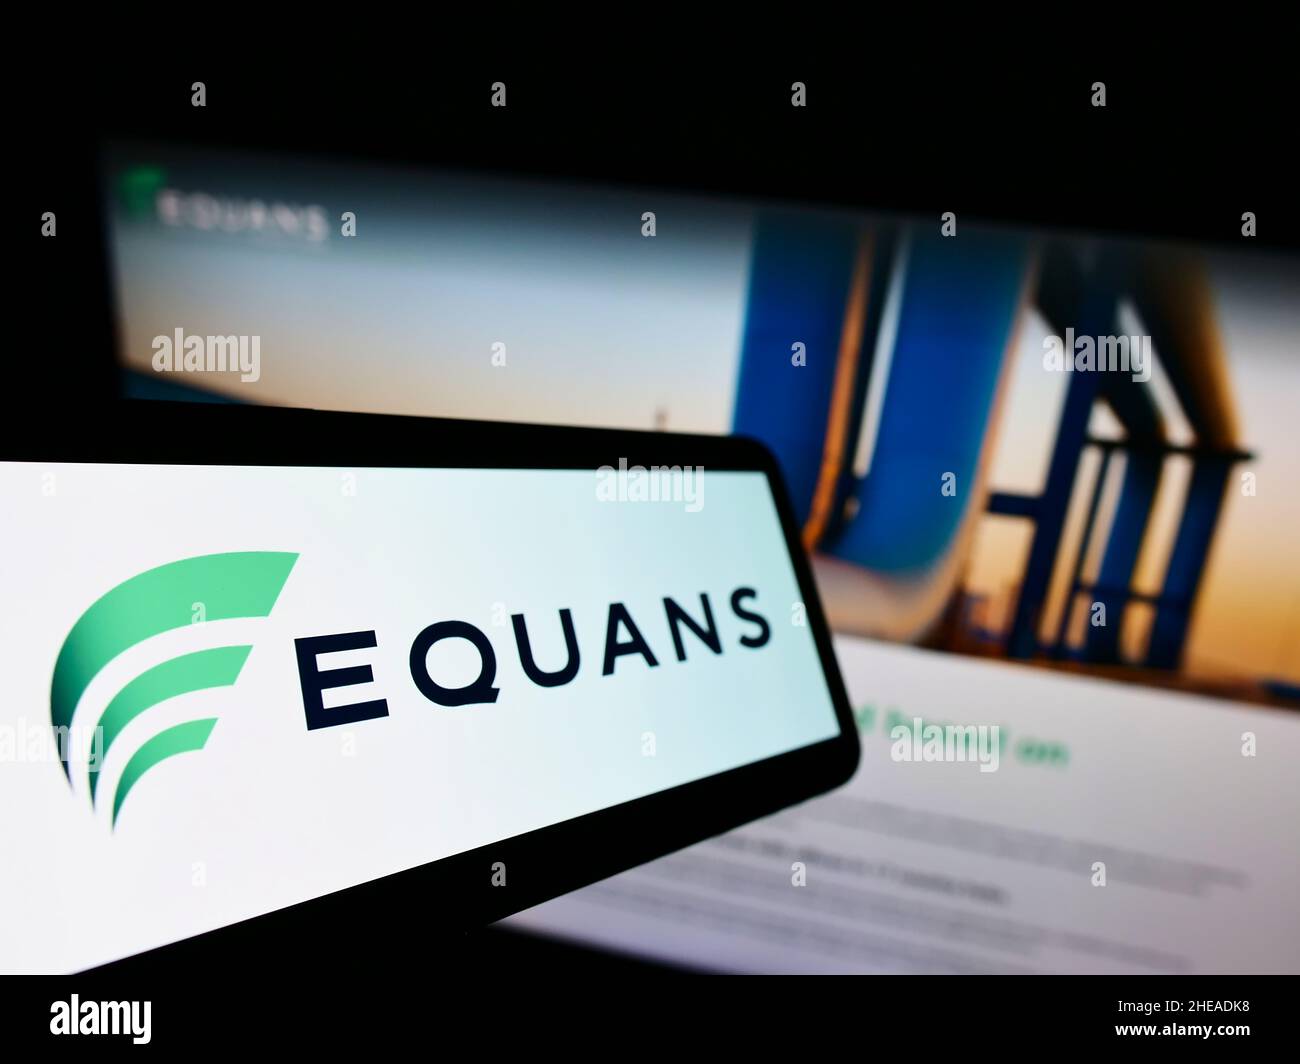 Mobile phone with logo of French facility management company EQUANS on screen in front of business website. Focus on left of phone display. Stock Photo